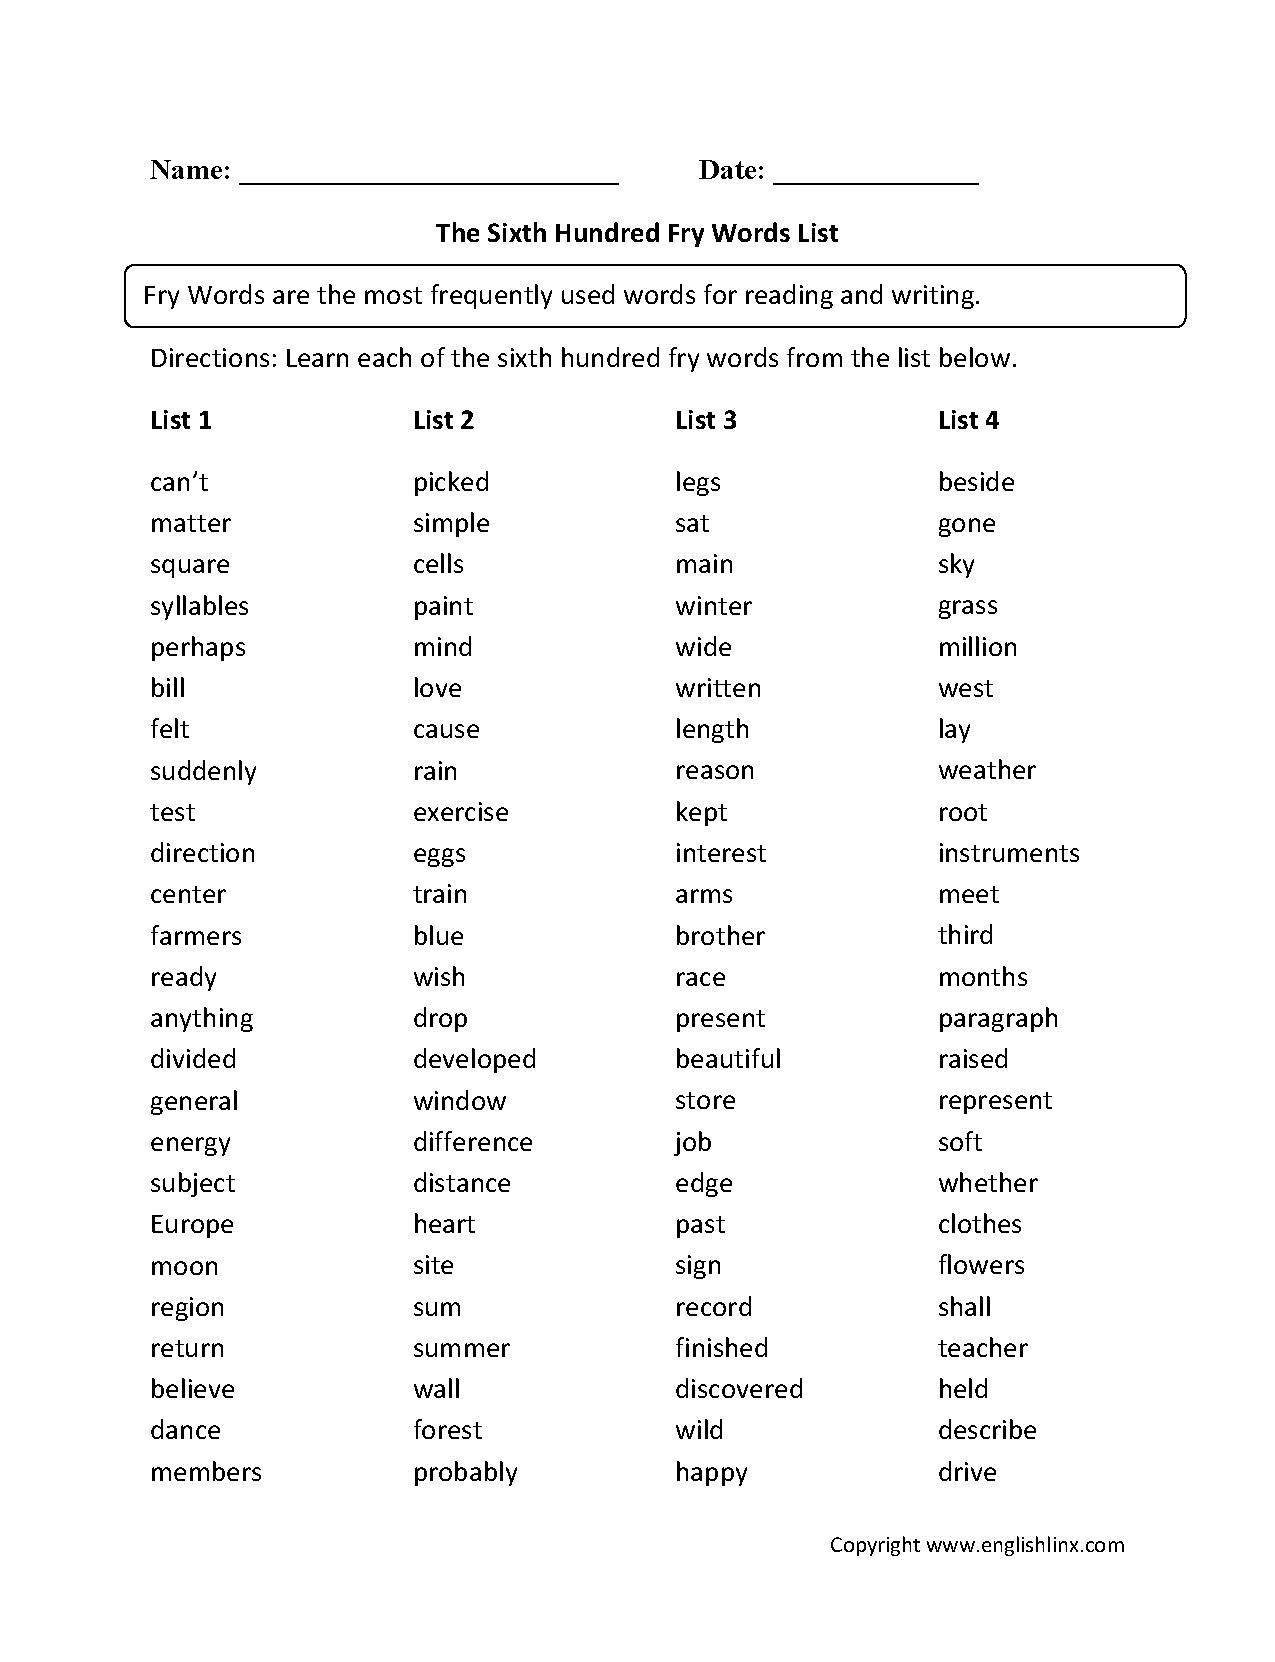 Fry Words Worksheets | Sixth Hundred Fry Words List Worksheets